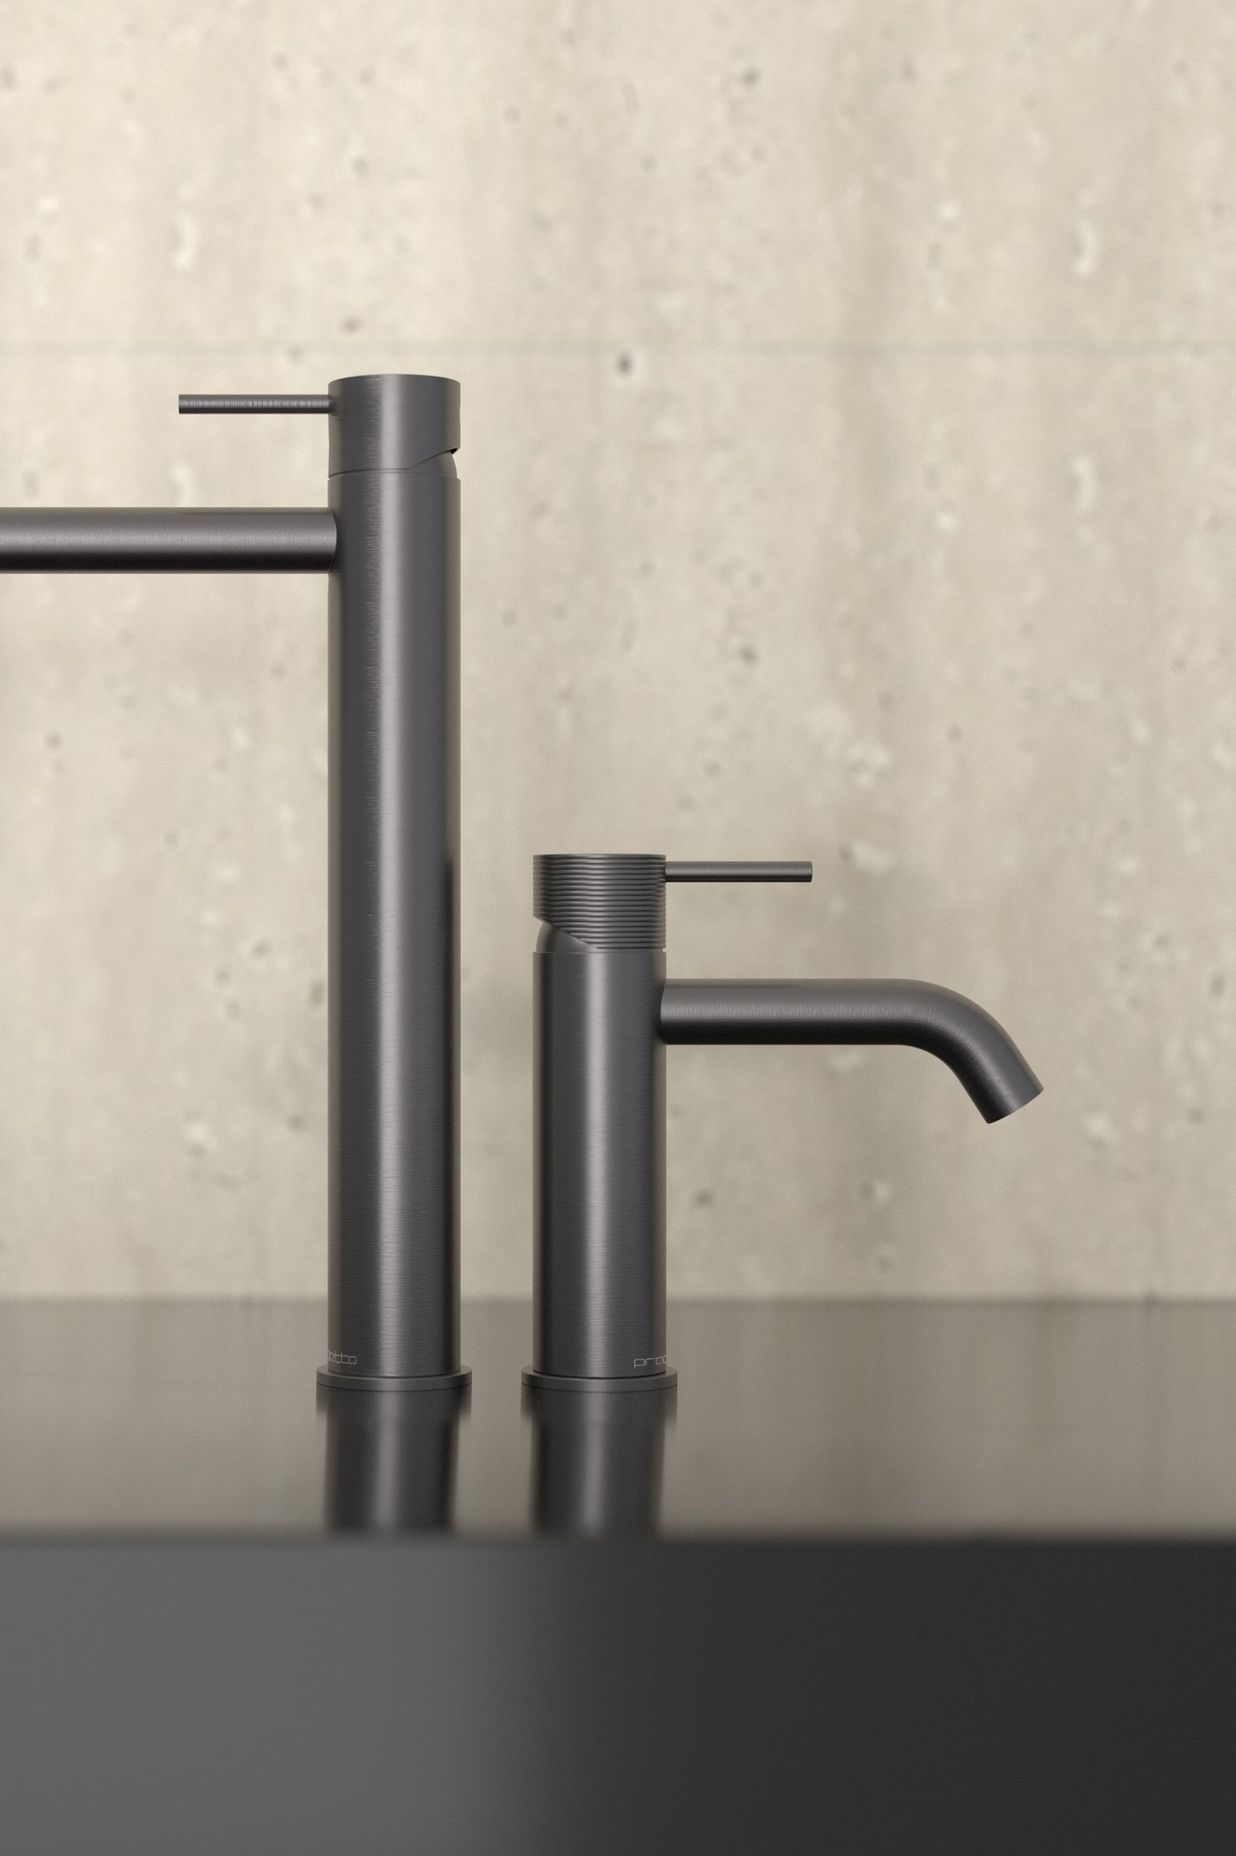 Oli 316 is available in four finishes and two designs, one of which features subtle striations around the handle that evoke a tactile response without being overly fussy.